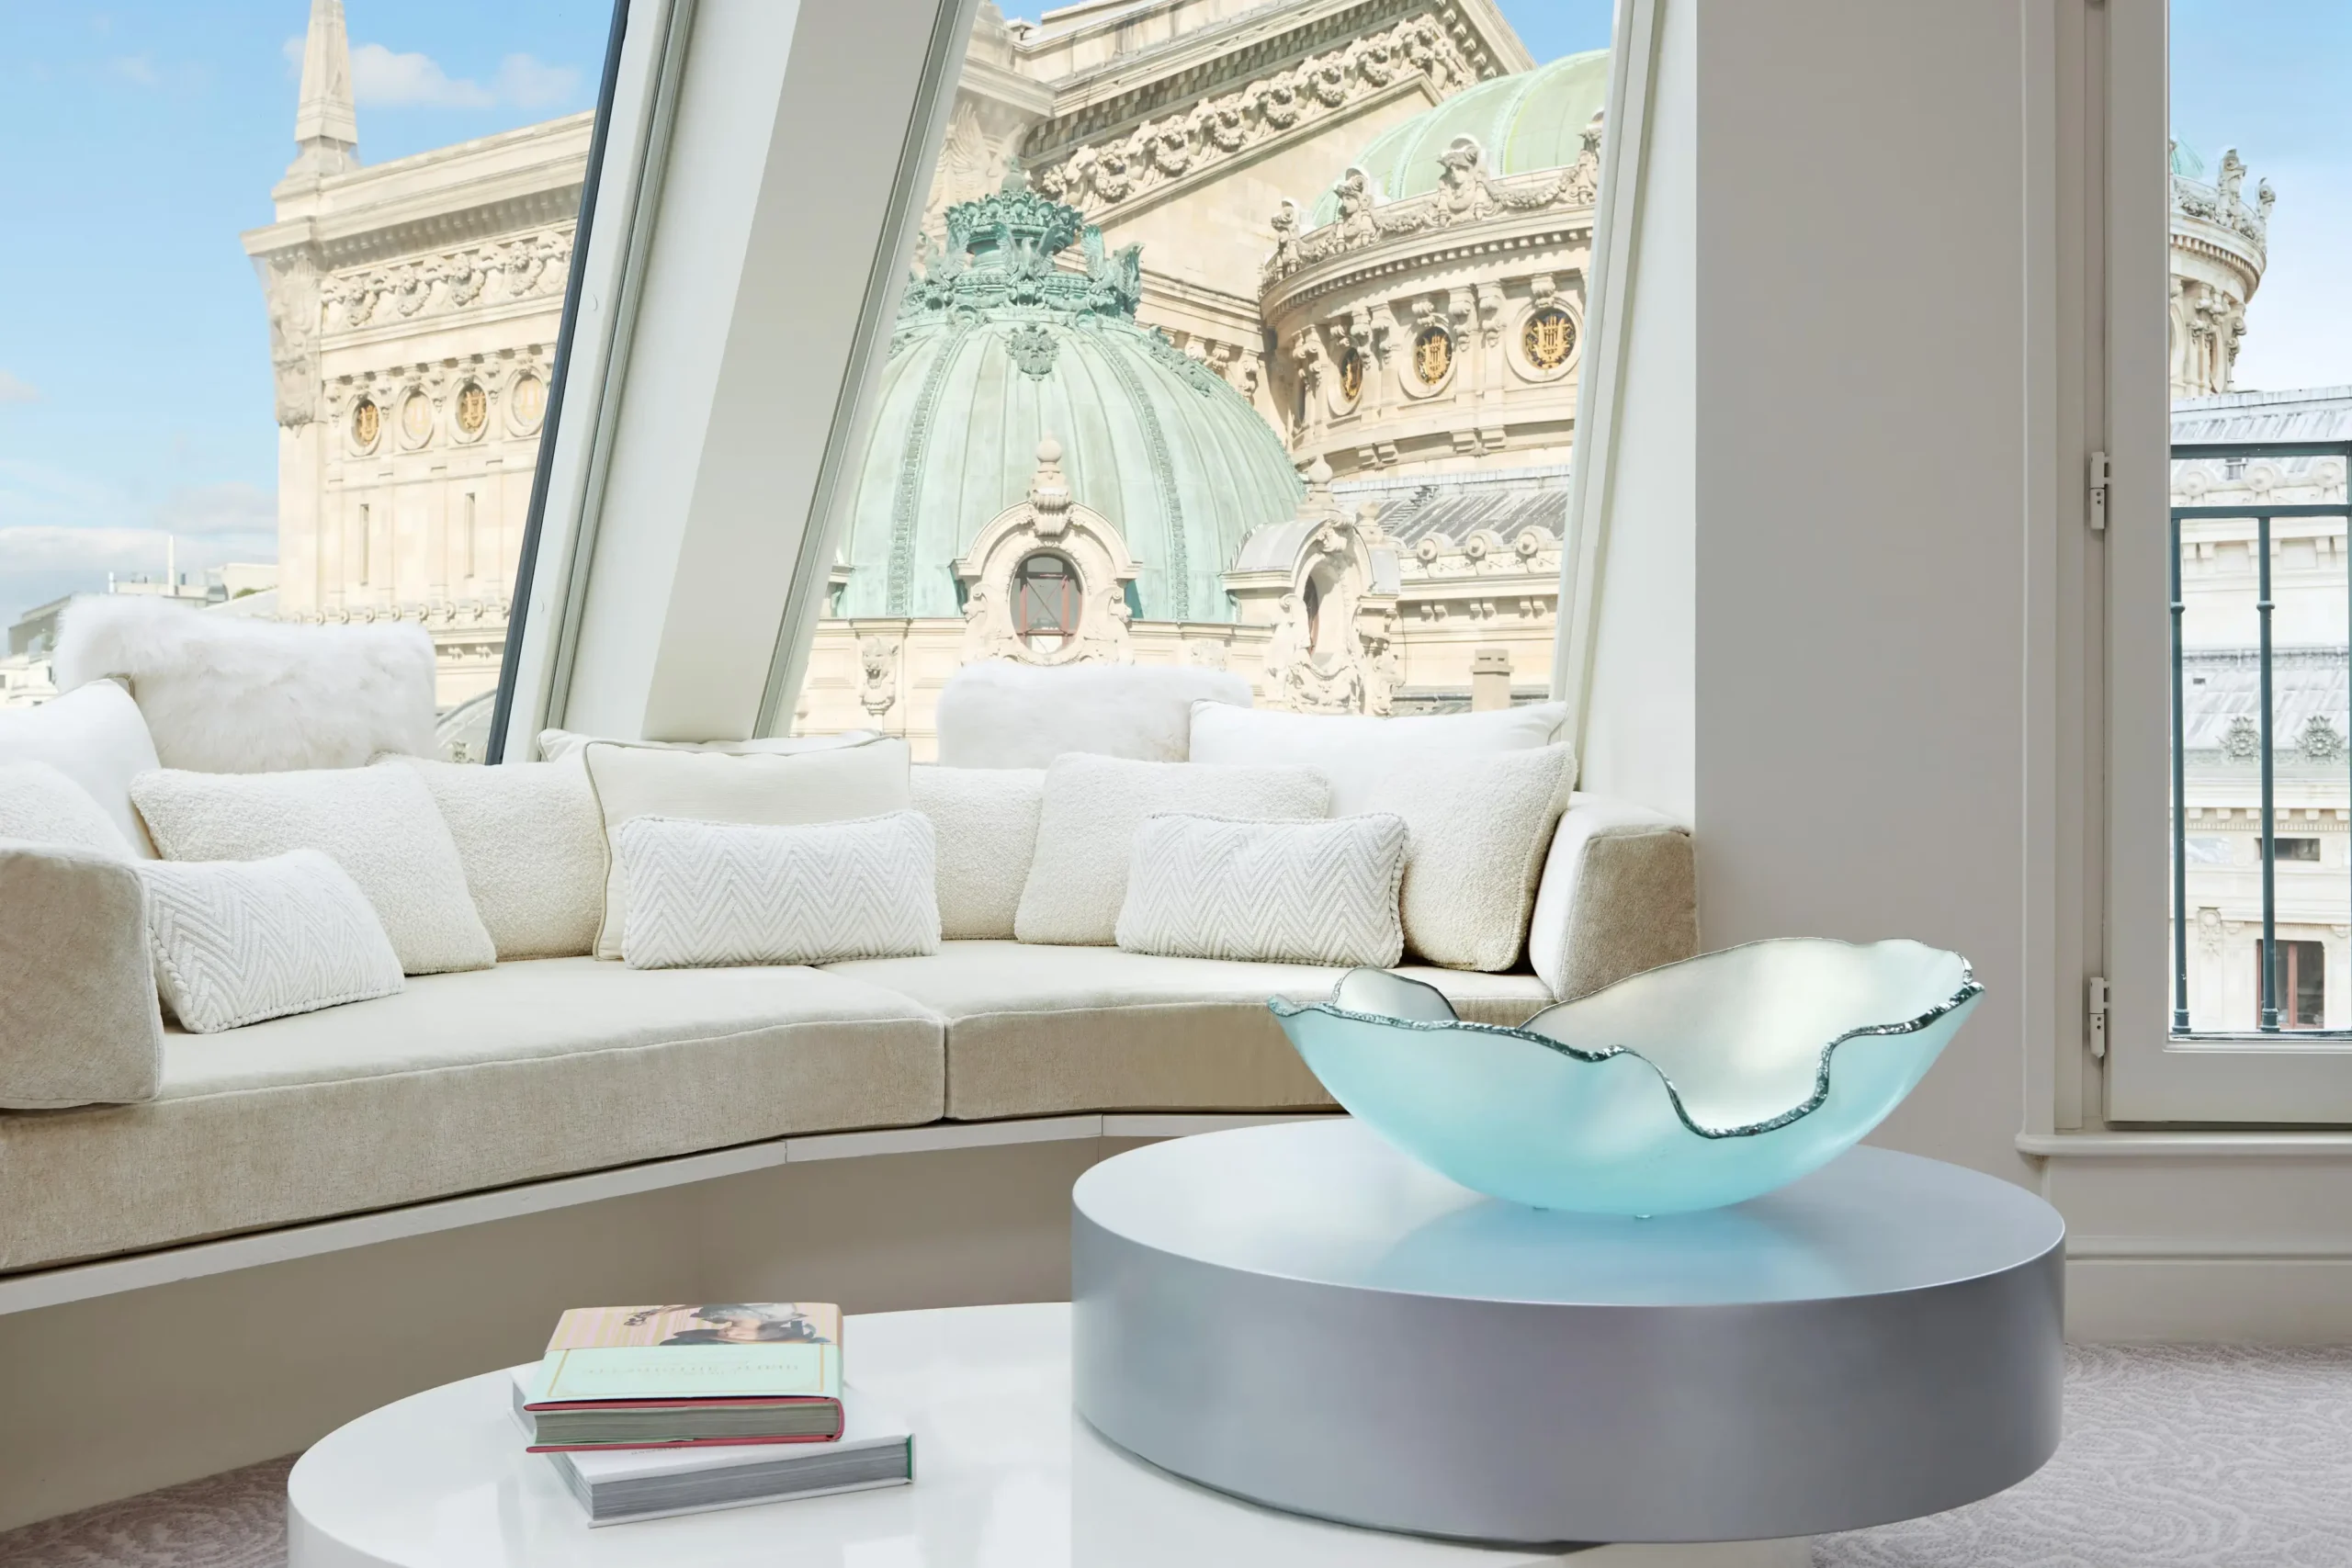 Luxurious and sustainable lounge area at the Intercontinental Paris, with plush white cushions, an elegant aqua glass bowl on a coffee table, and a grand view of the Palais Garnier opera house.